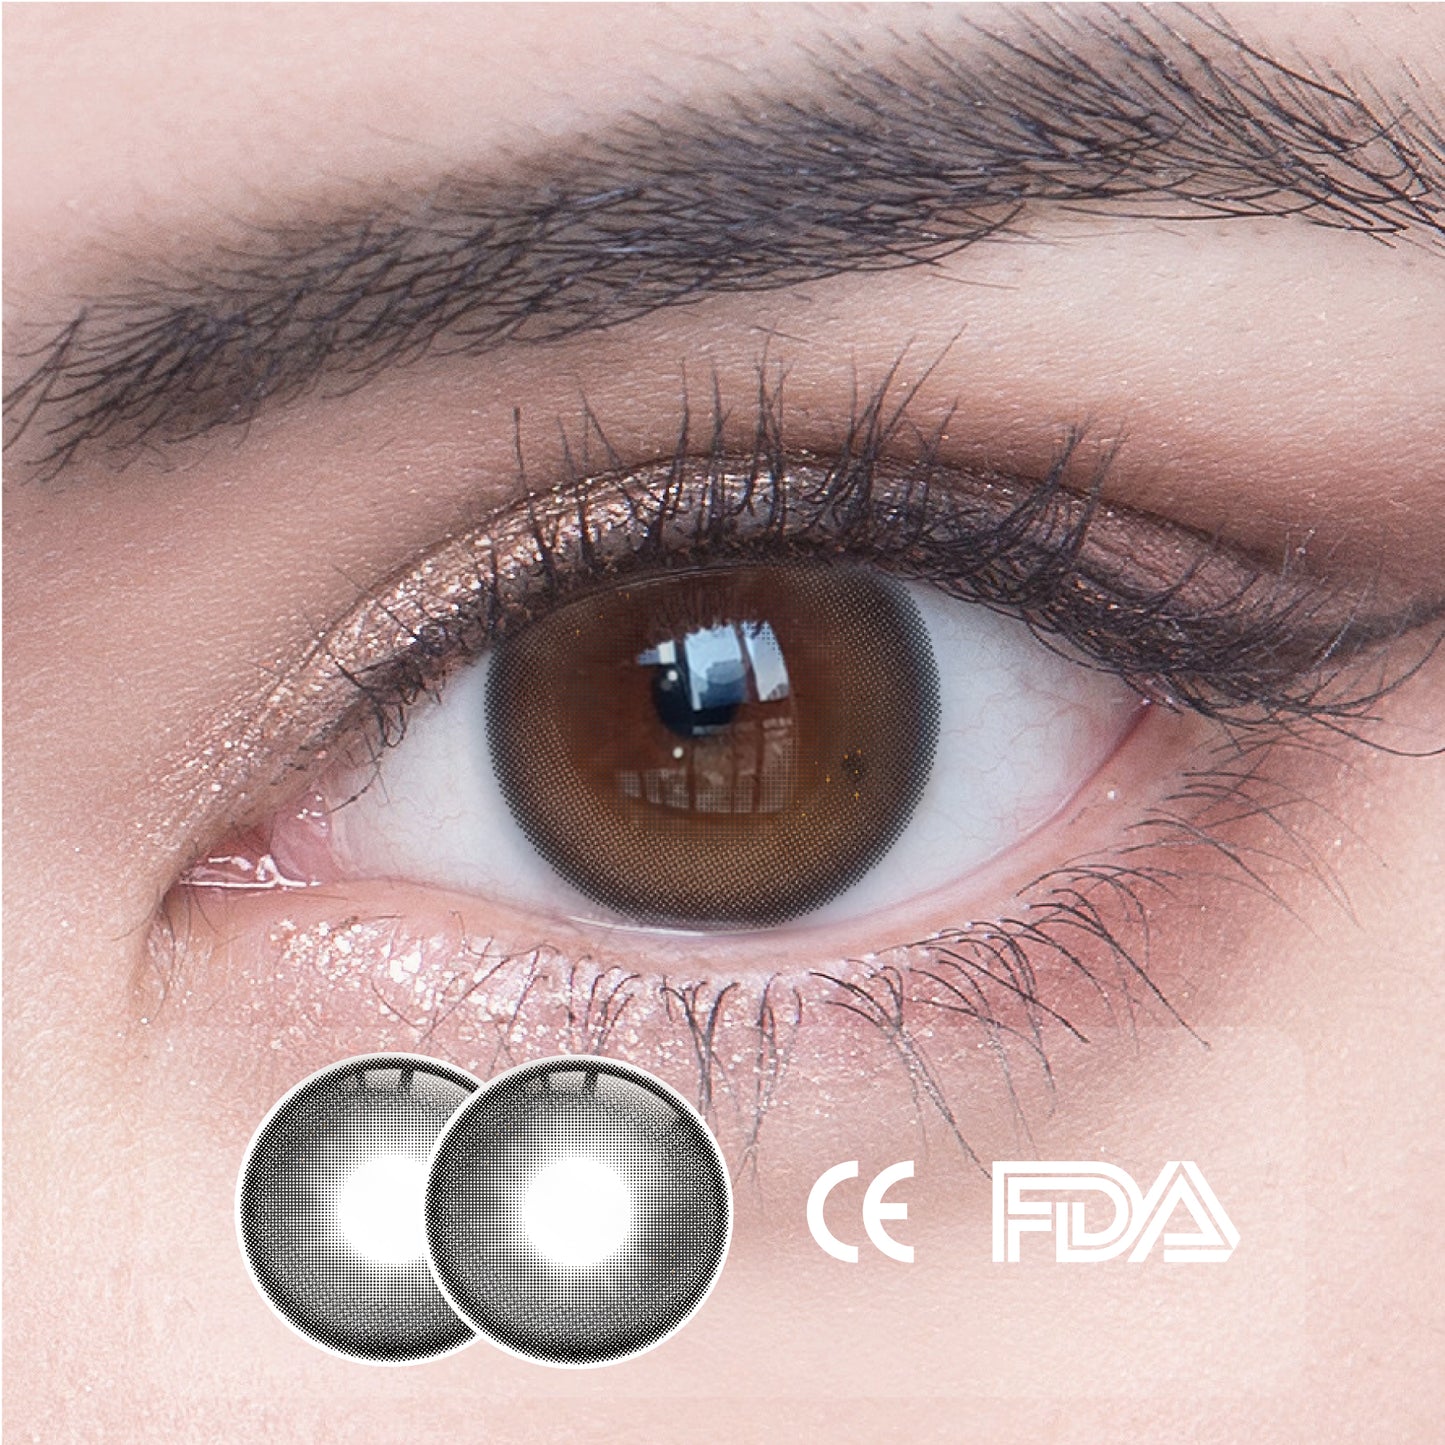 1pcs FDA Certificate Eyes Colorful Contact Lenses - Fascinated Black